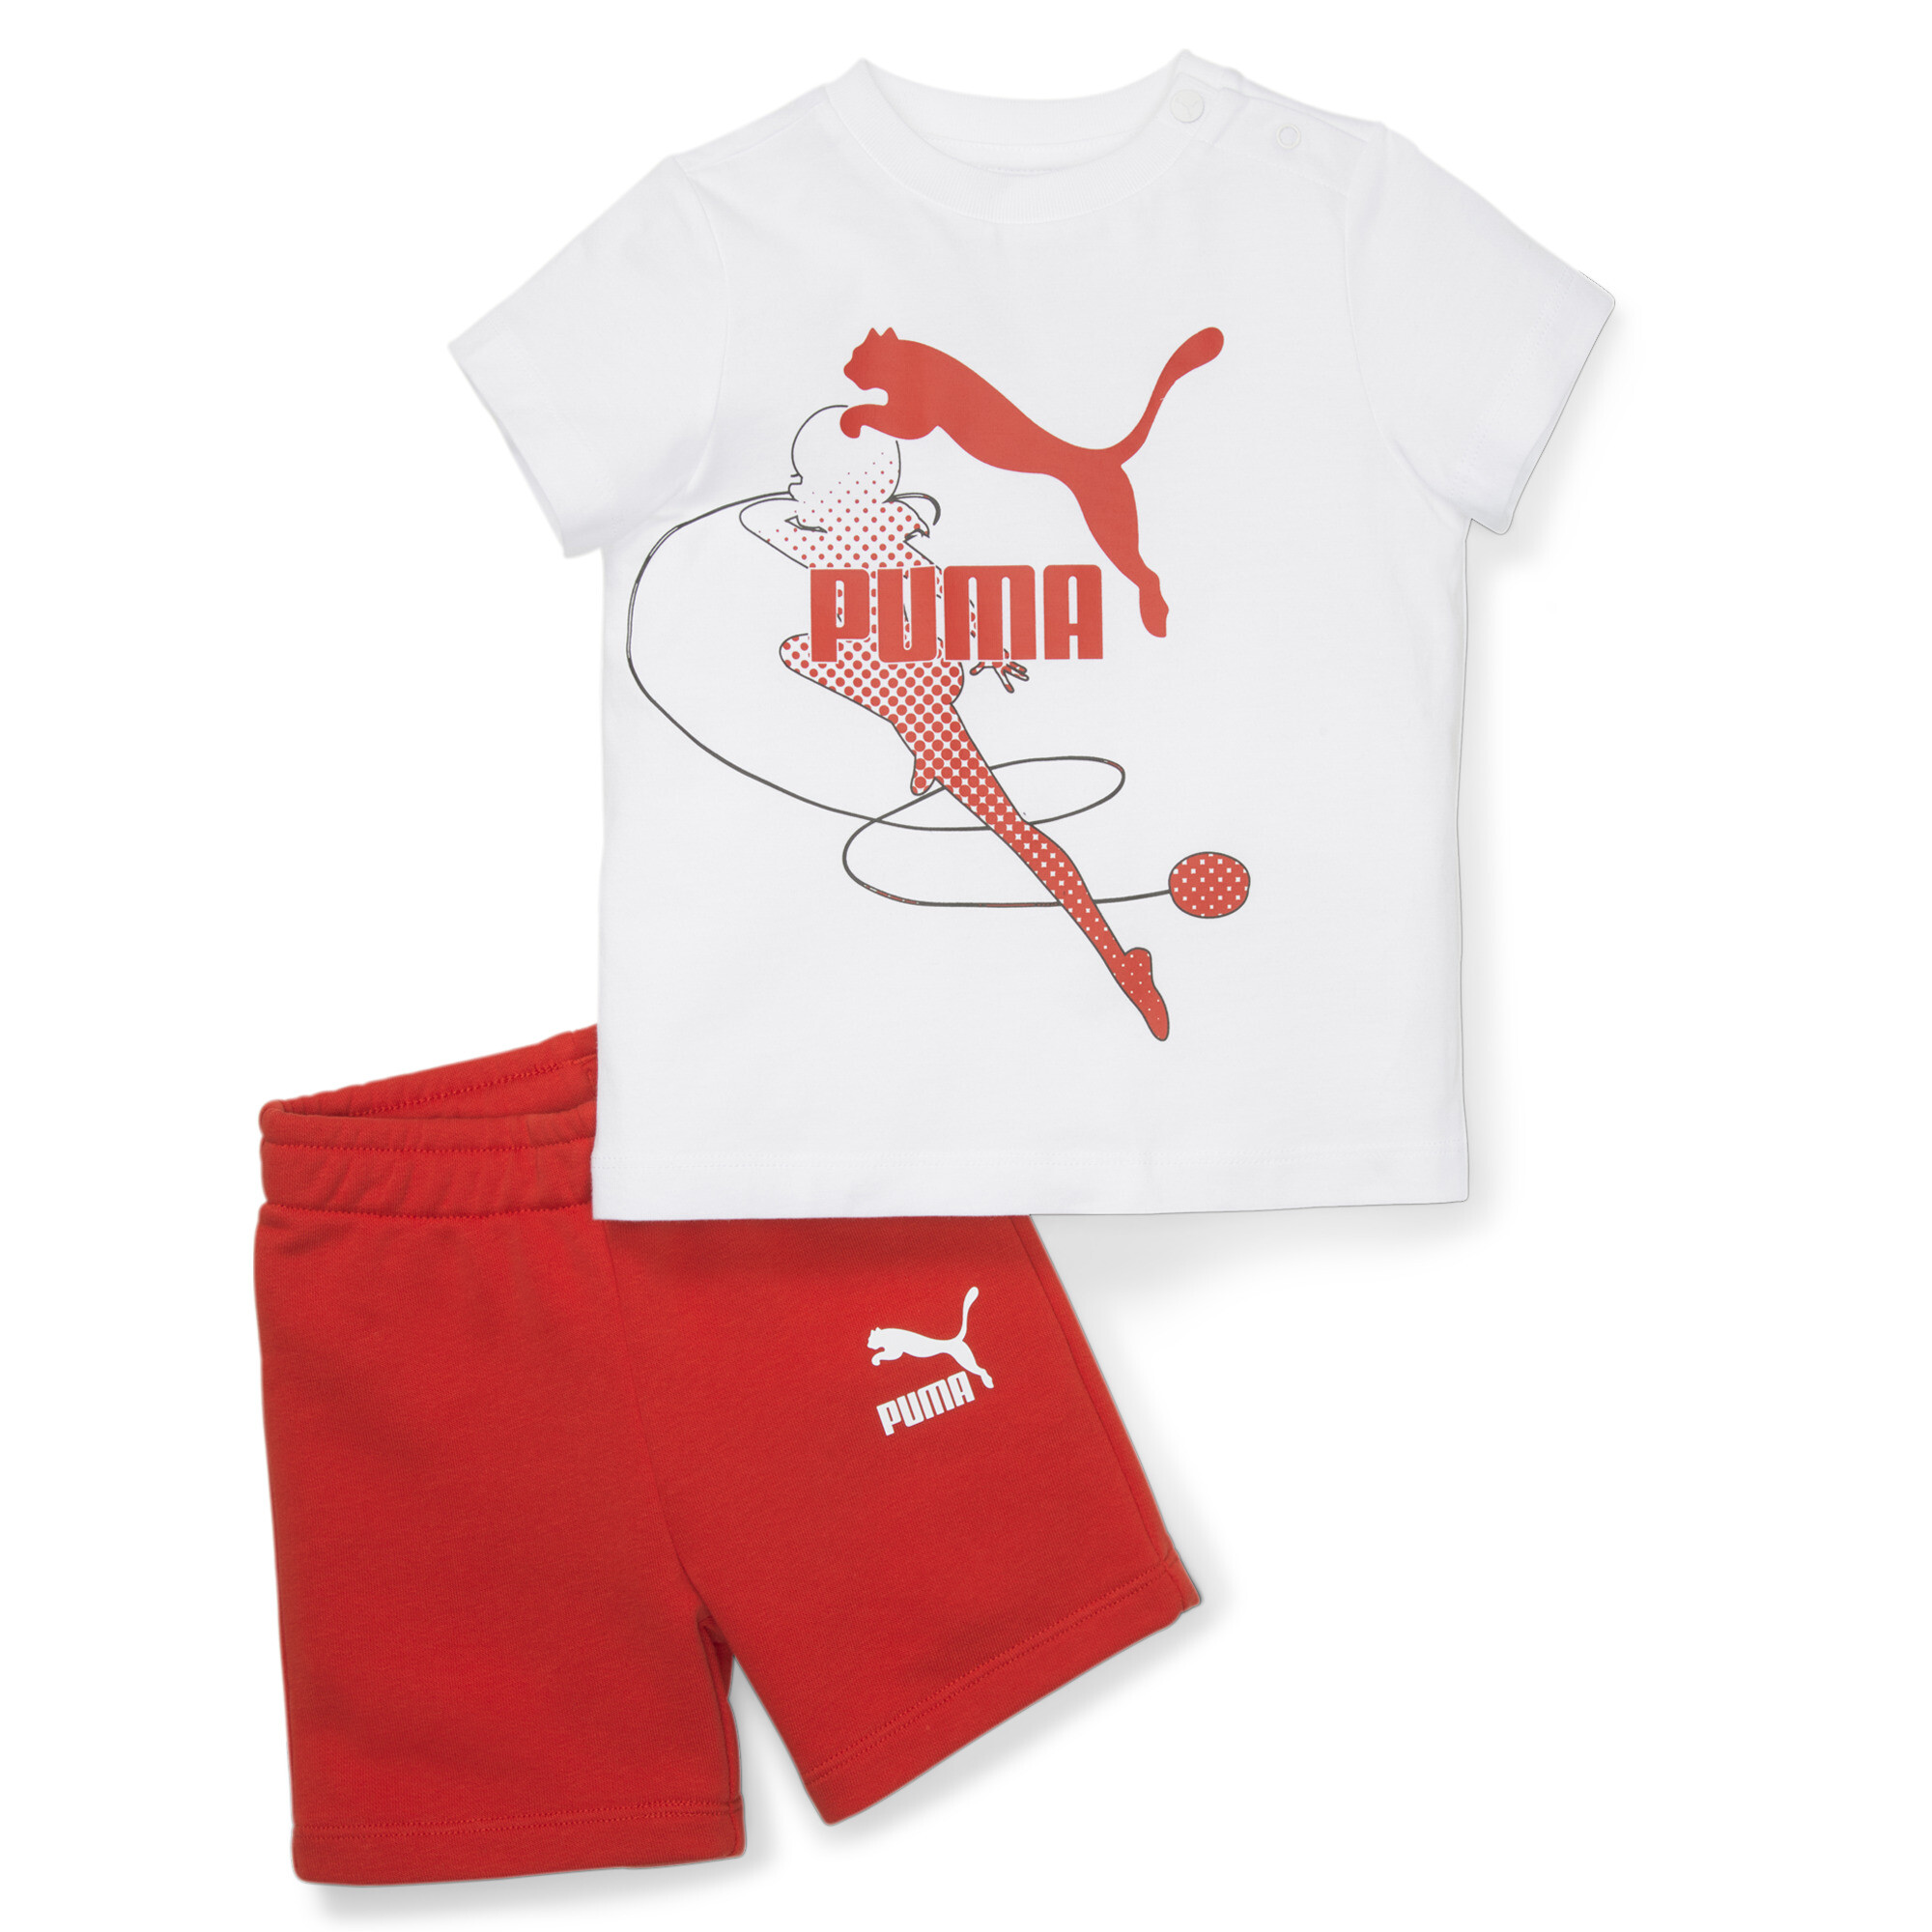 PUMA X MIRACULOUS Set Kids In White, Size 4-6 Months